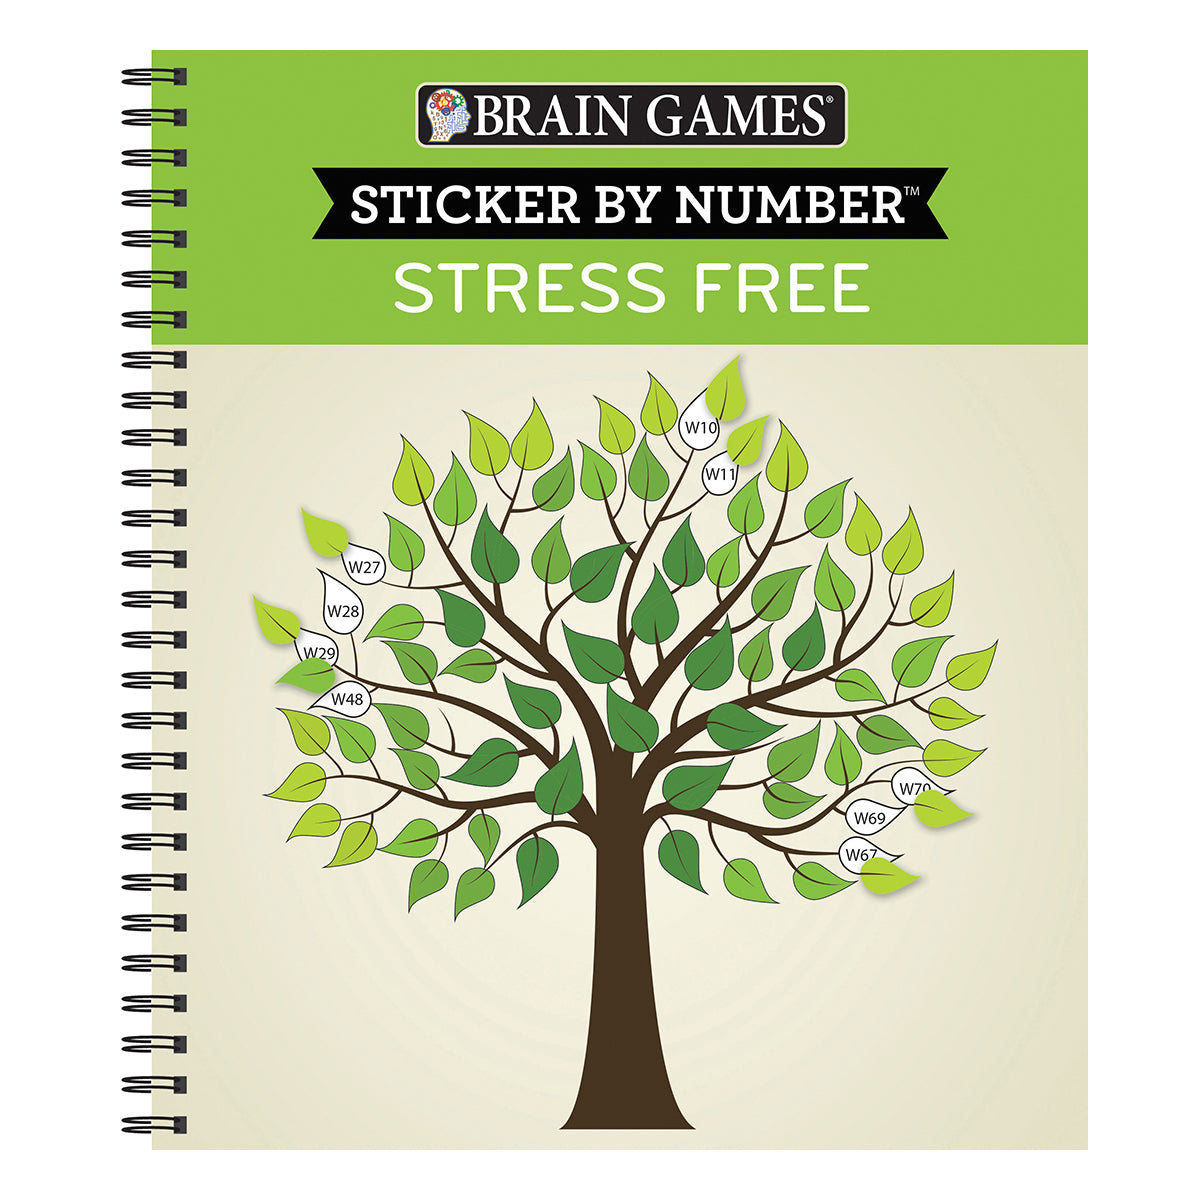 Brain Games  Sticker by Number Stress Free 28 Images to Sticker